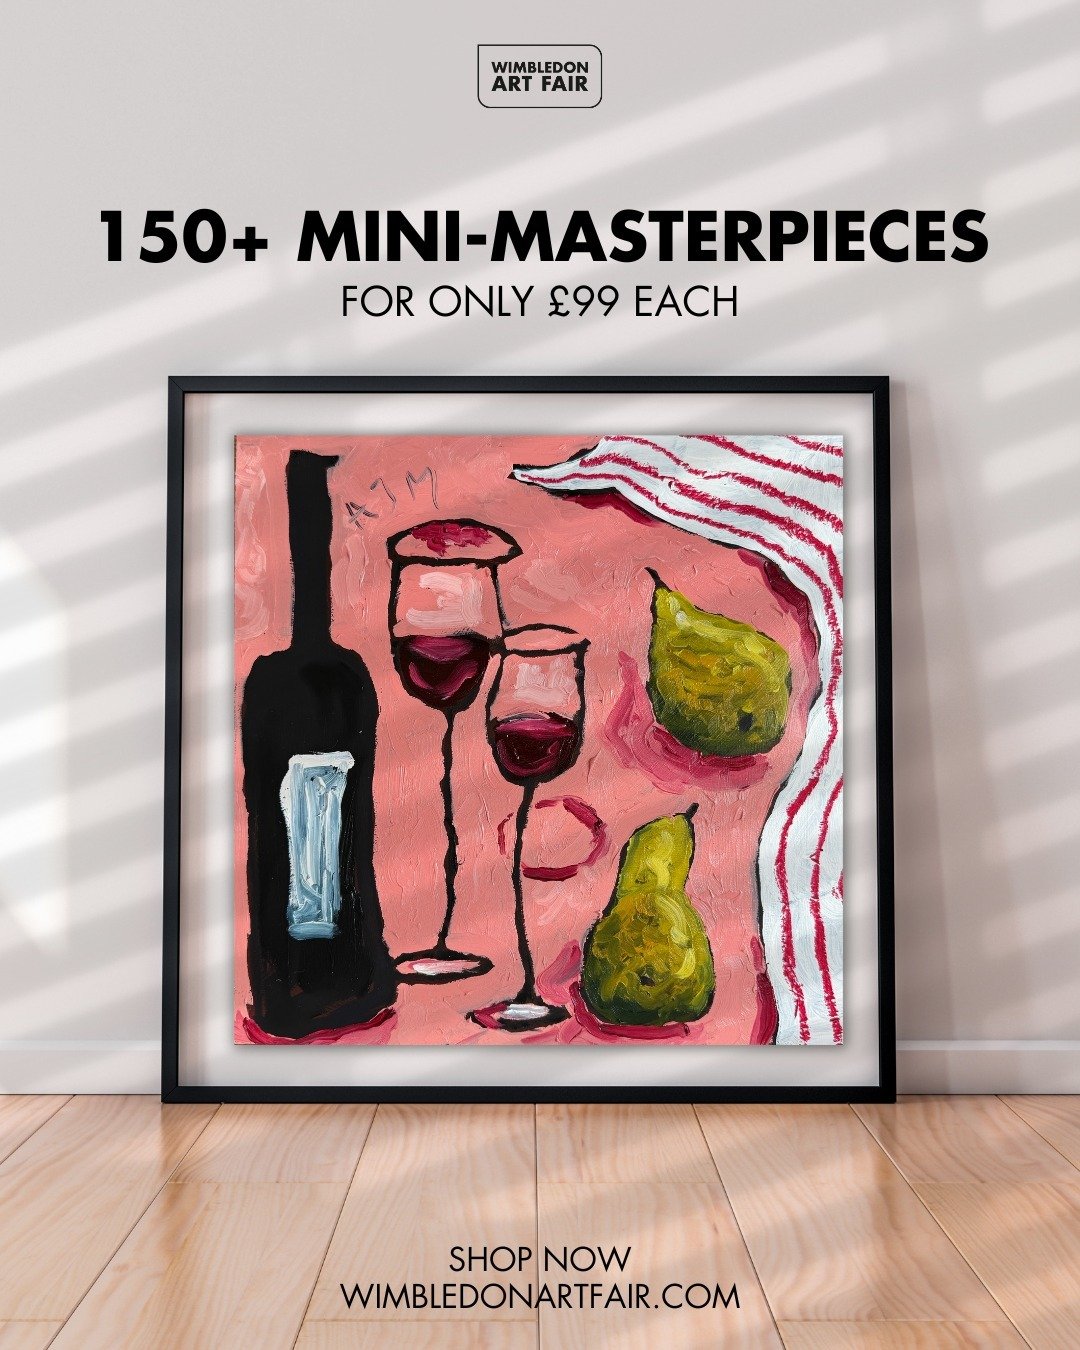 The wait is finally over - the Mini-Masterpiece is LIVE! 🙌

Looking to own a one-of-a-kind piece of art without breaking the bank? Head to our link in bio for our unique Mini-Masterpiece sale, with 150+ original artworks from London's most talented 